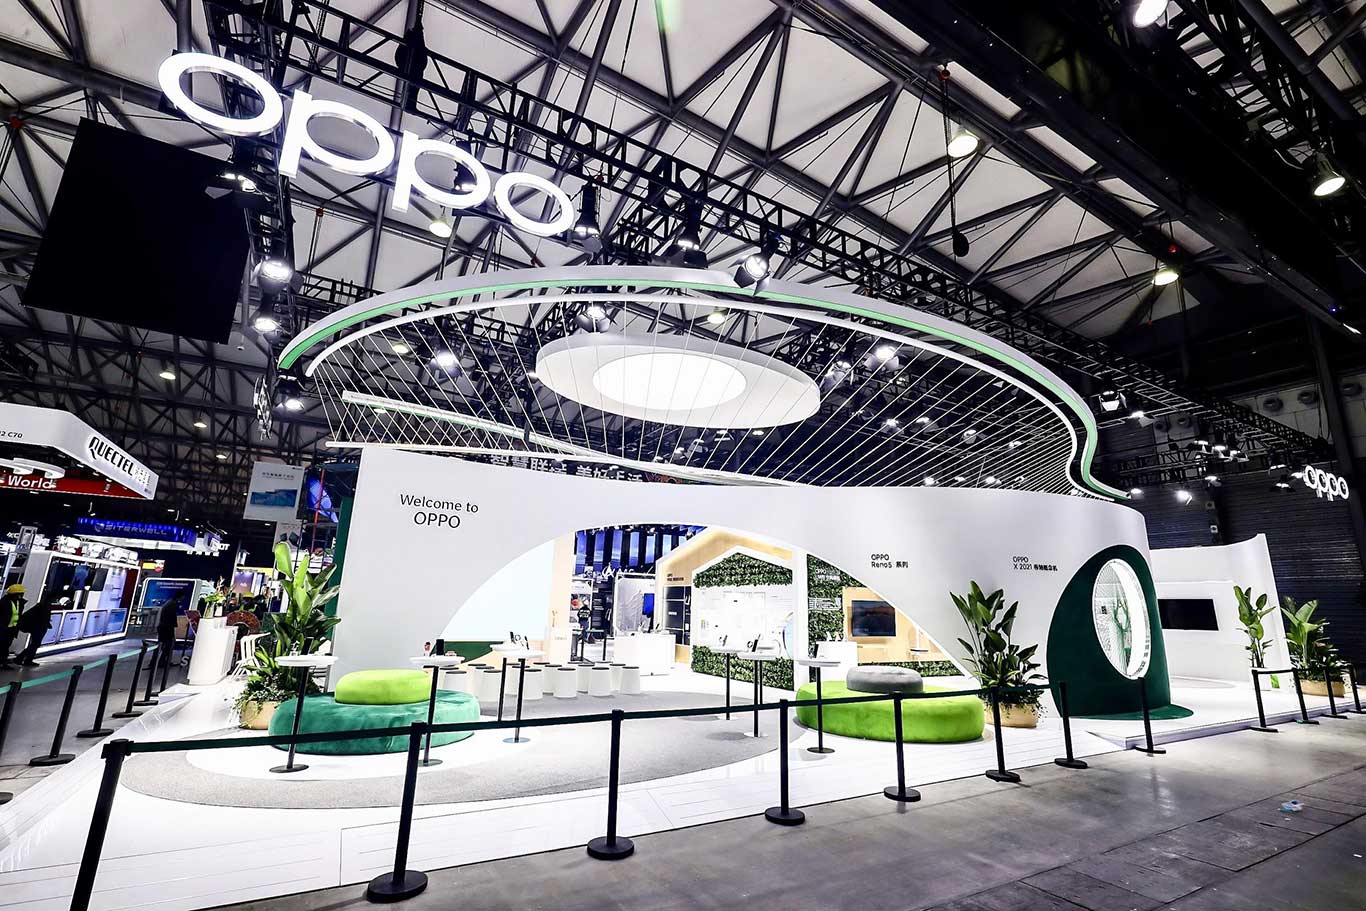 OPPO showcases Flash Charging, 5G, and Smart innovations in Shanghai